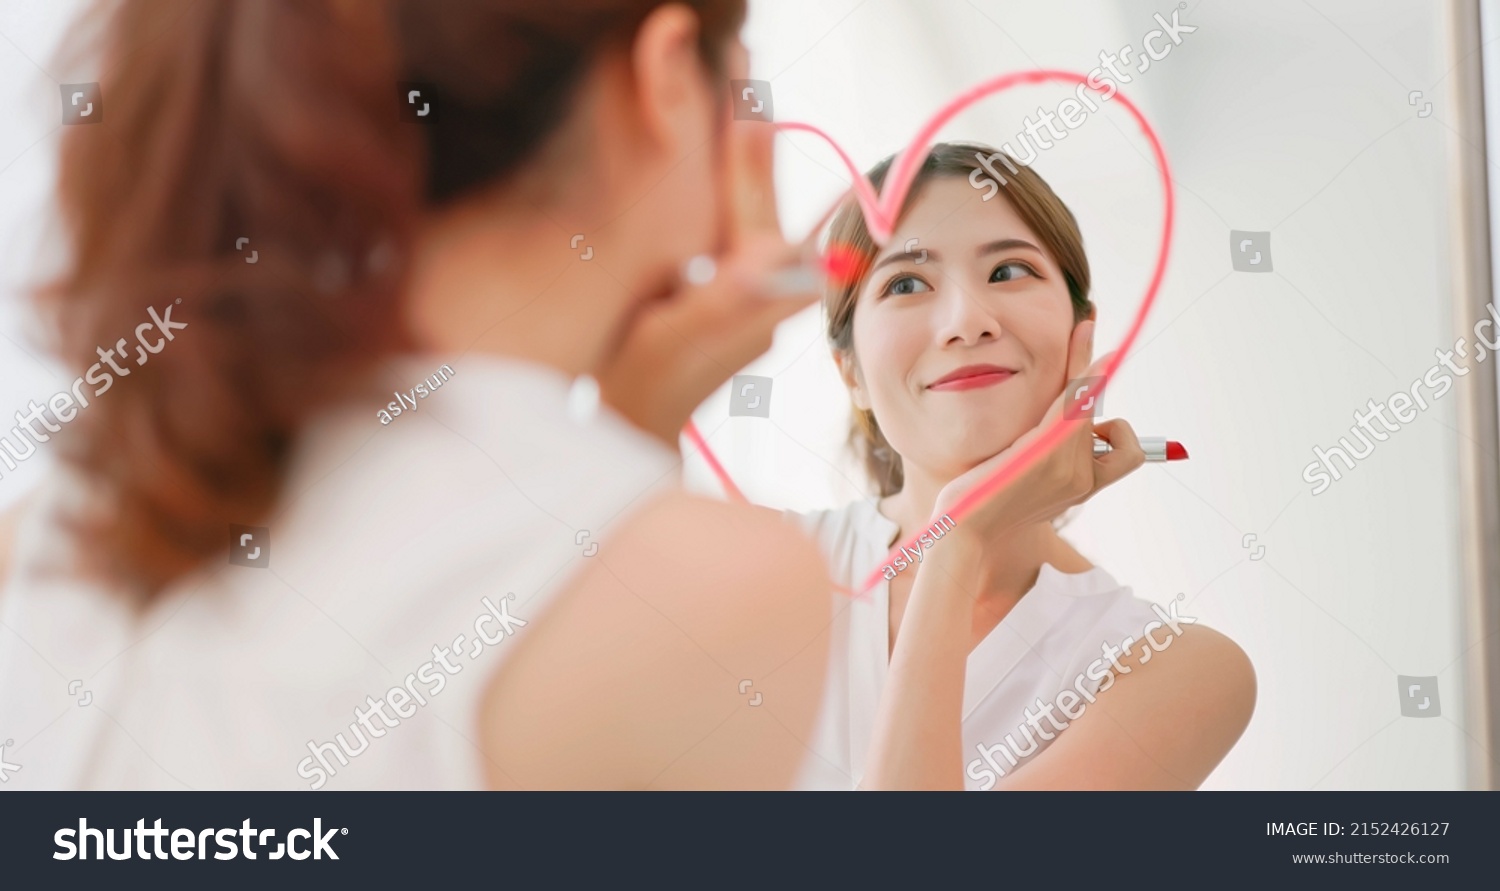 asian woman with brunette ponytail draws a heart shape use lipstick on the mirror and look at herself feeling confident self love #2152426127